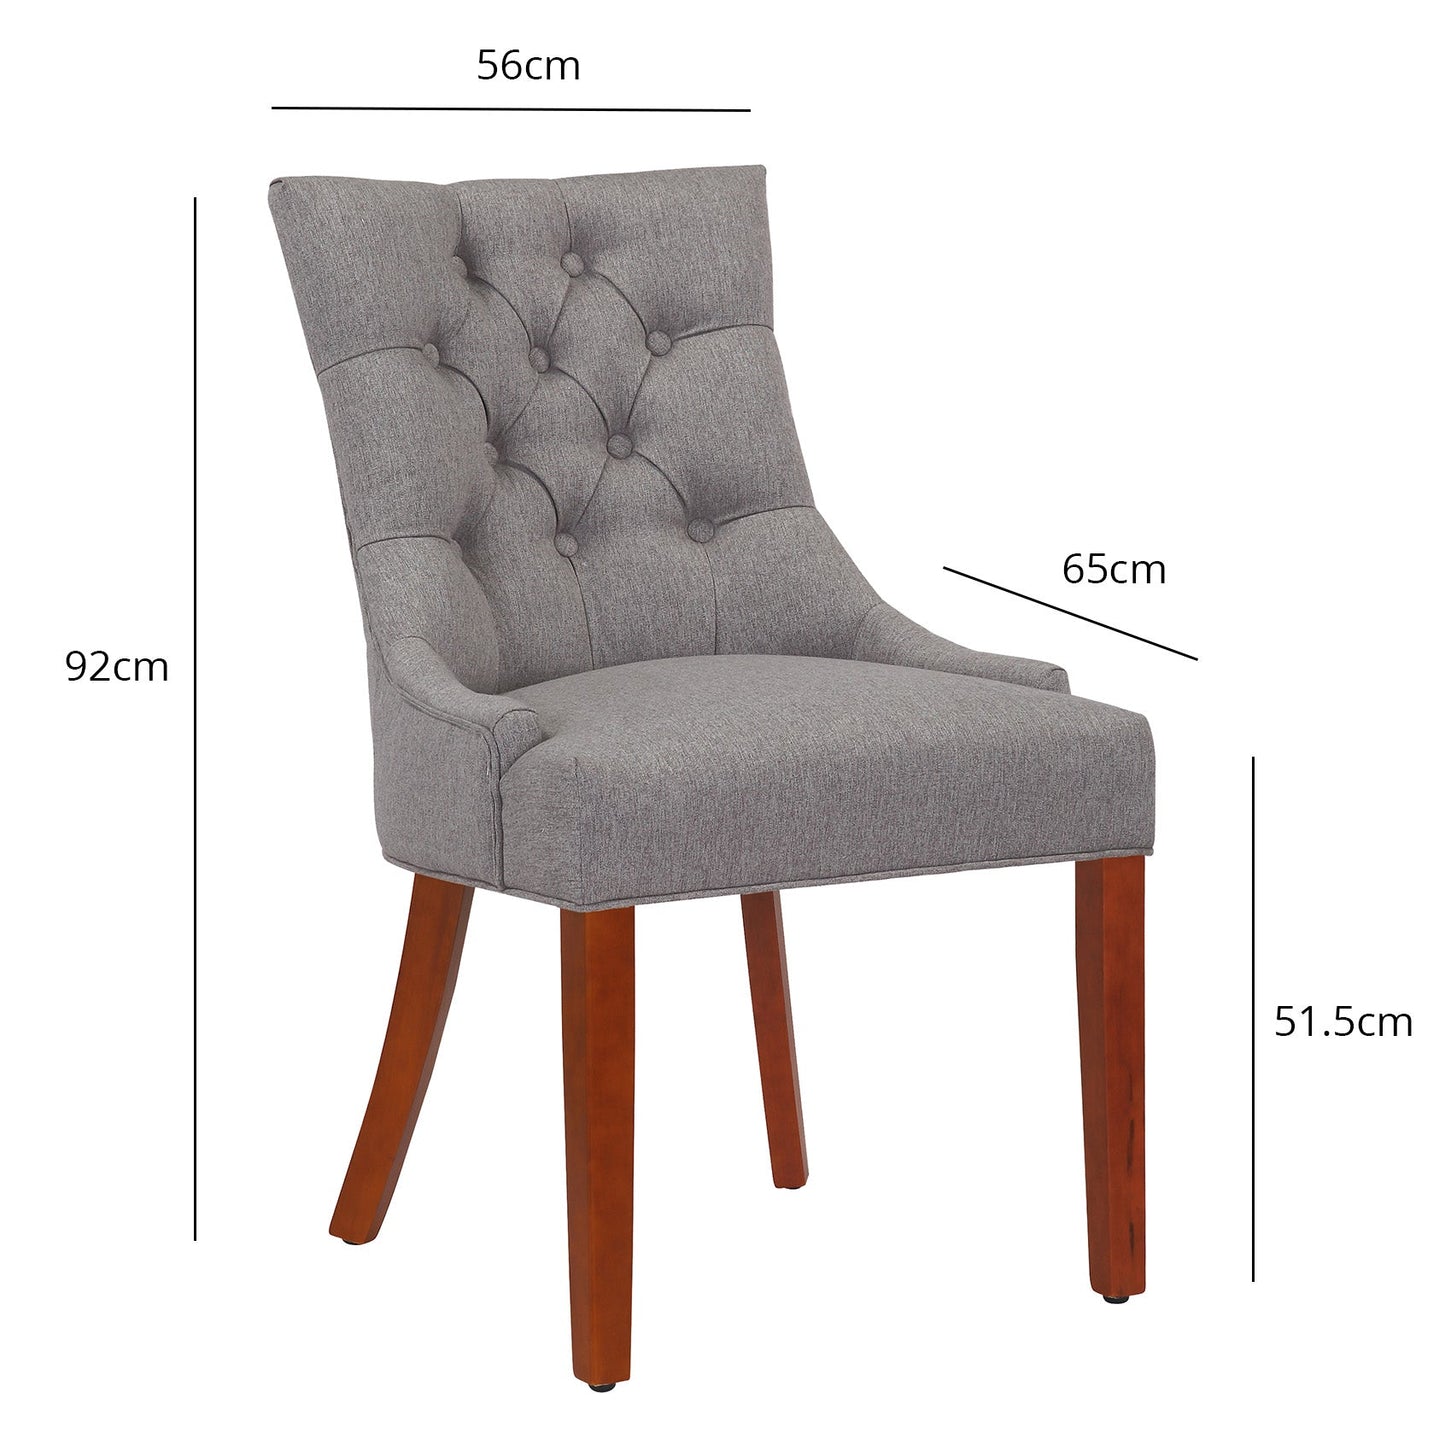 Louis dining chairs - grey and dark wood - Laura James